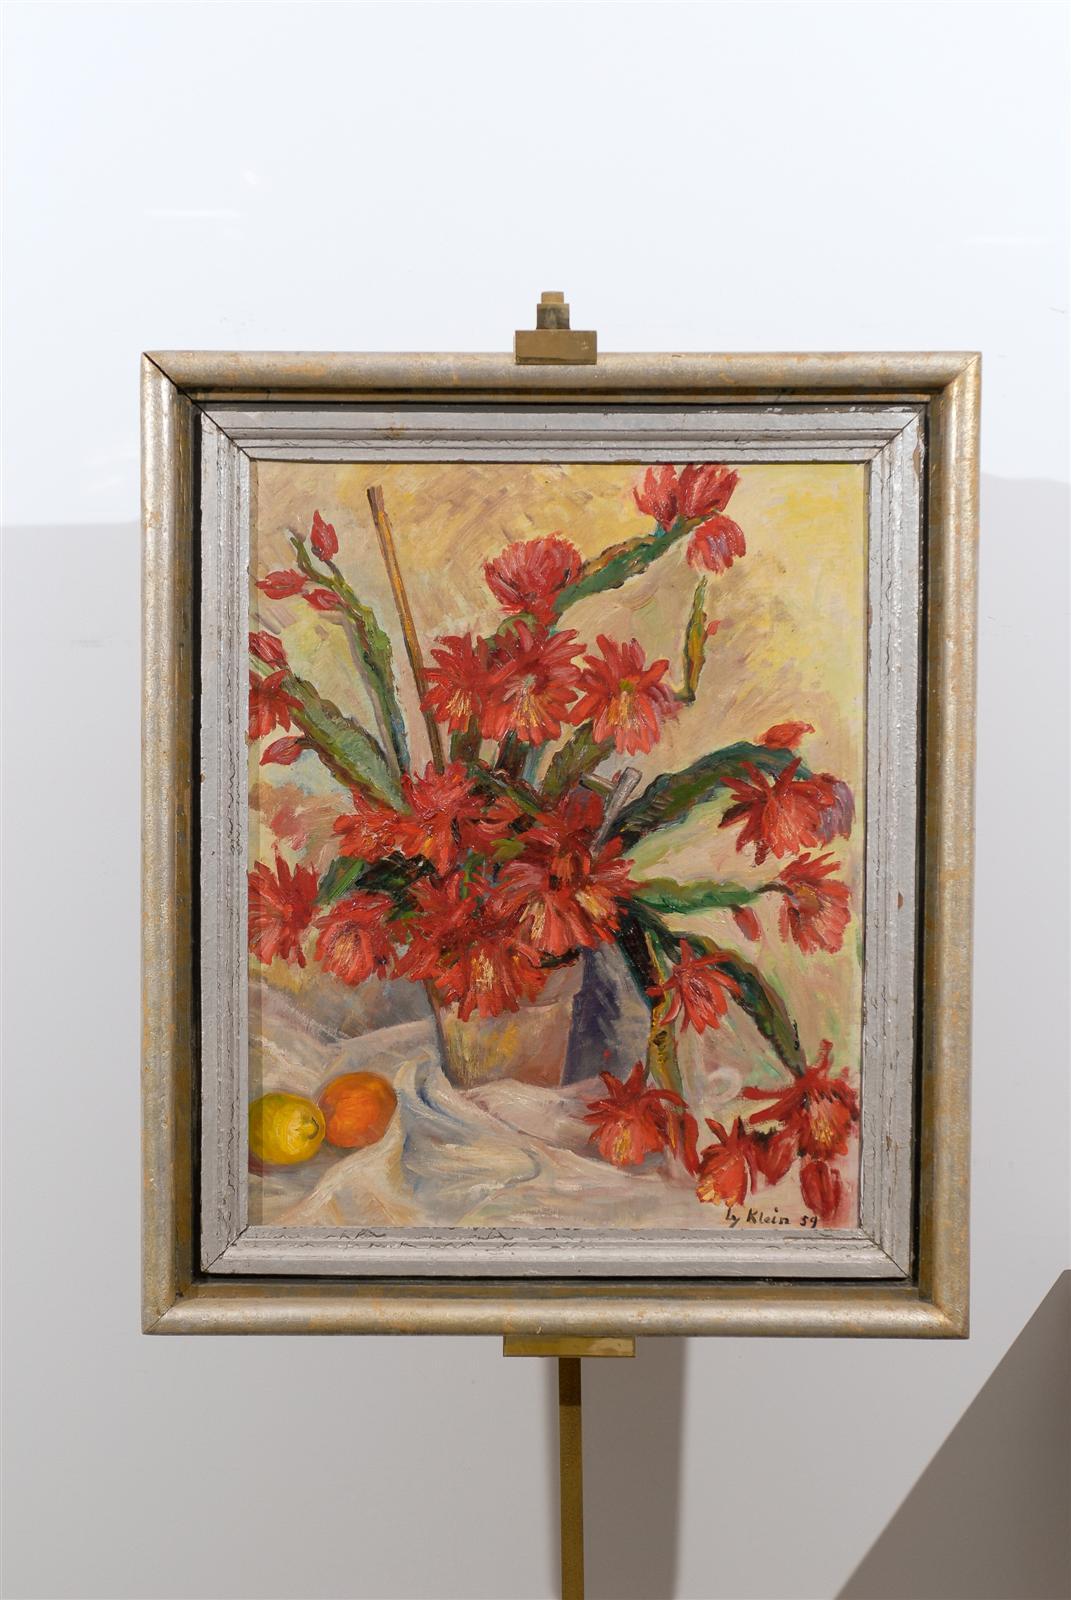 Beautiful Still Life Painting  Oil on Canvas in Reds, Oranges Greens & Yellow
Signed Klein 1959